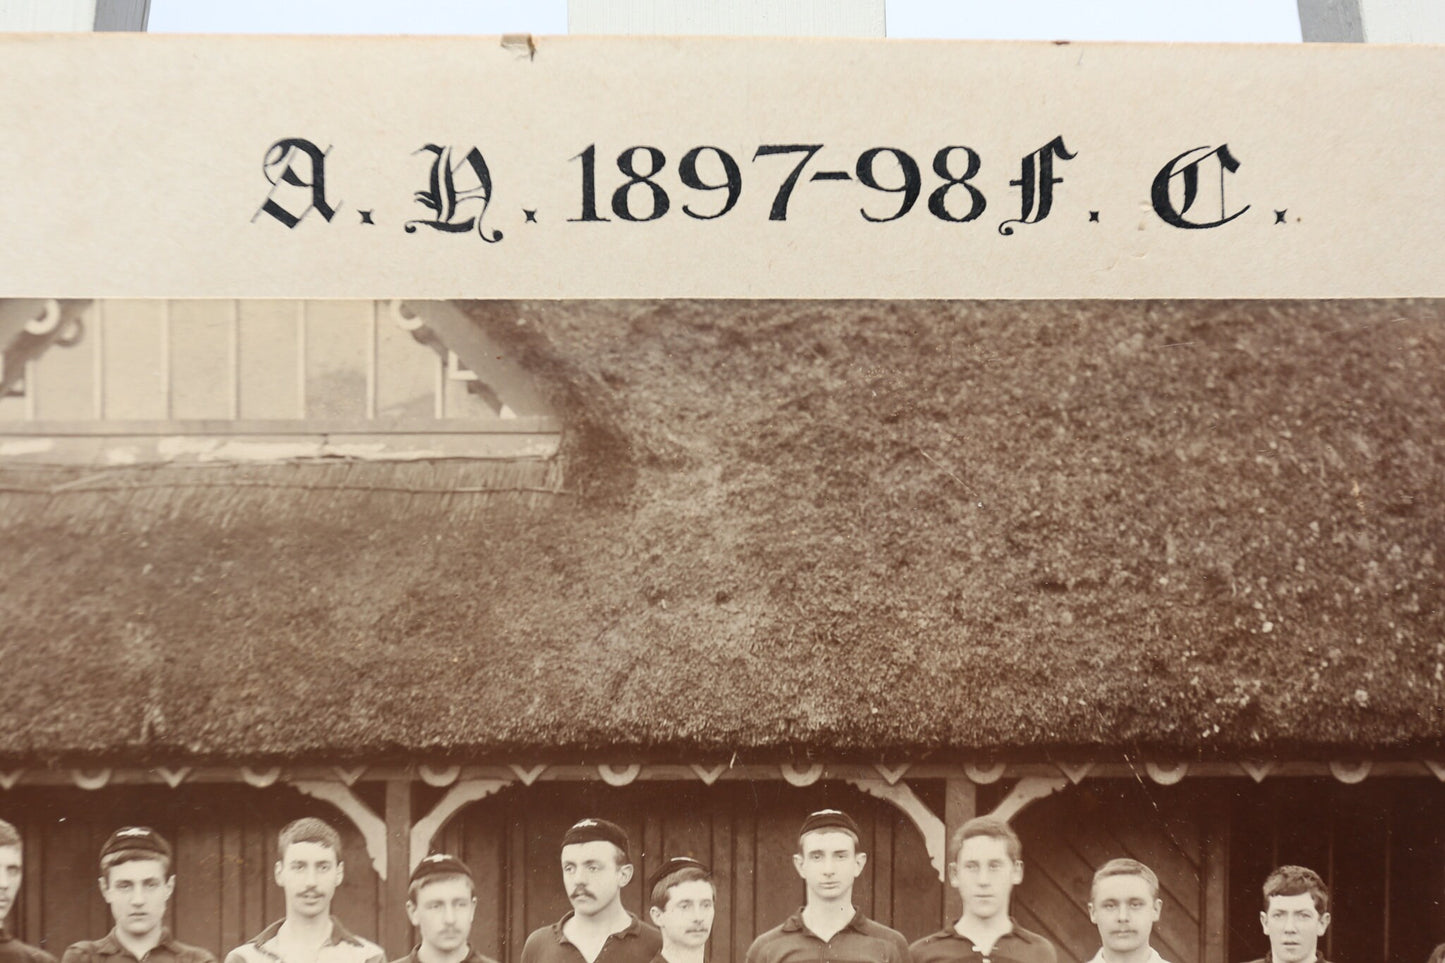 Antique Large Format Photograph Rugby Team Photo 1897-1898 Old Honitionian Thatch Roof Rugby Stripes Fully Labeled Hand Calligraphy